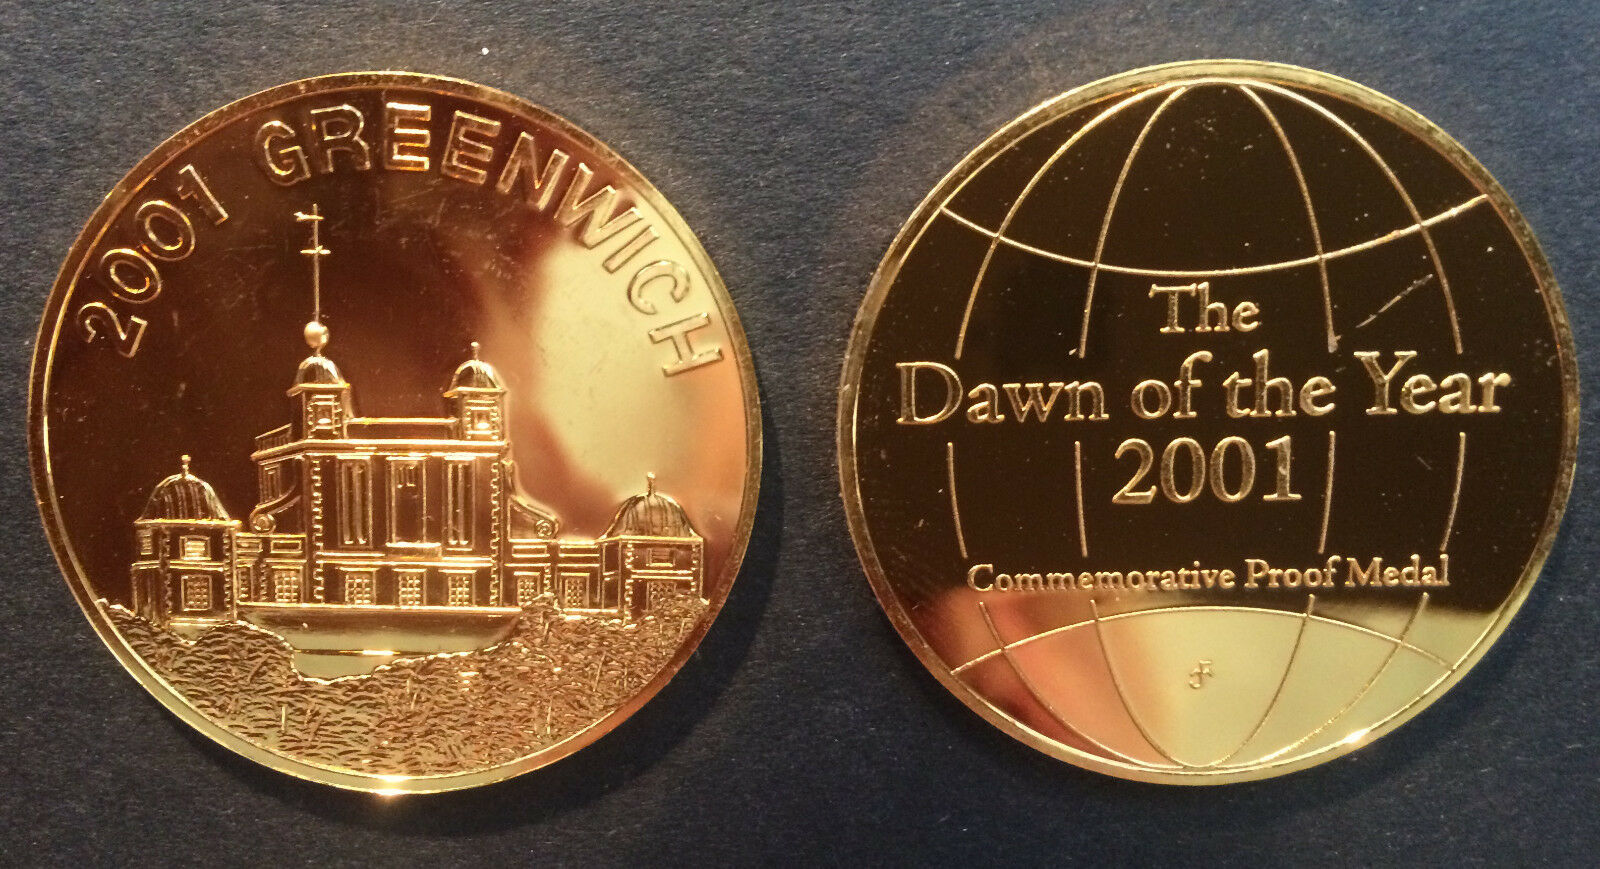 GOLD PLATED SILVER (.999 - 1 OZ) PROOF MEDAL by FRANKLIN MINT 2001 GREENWICH